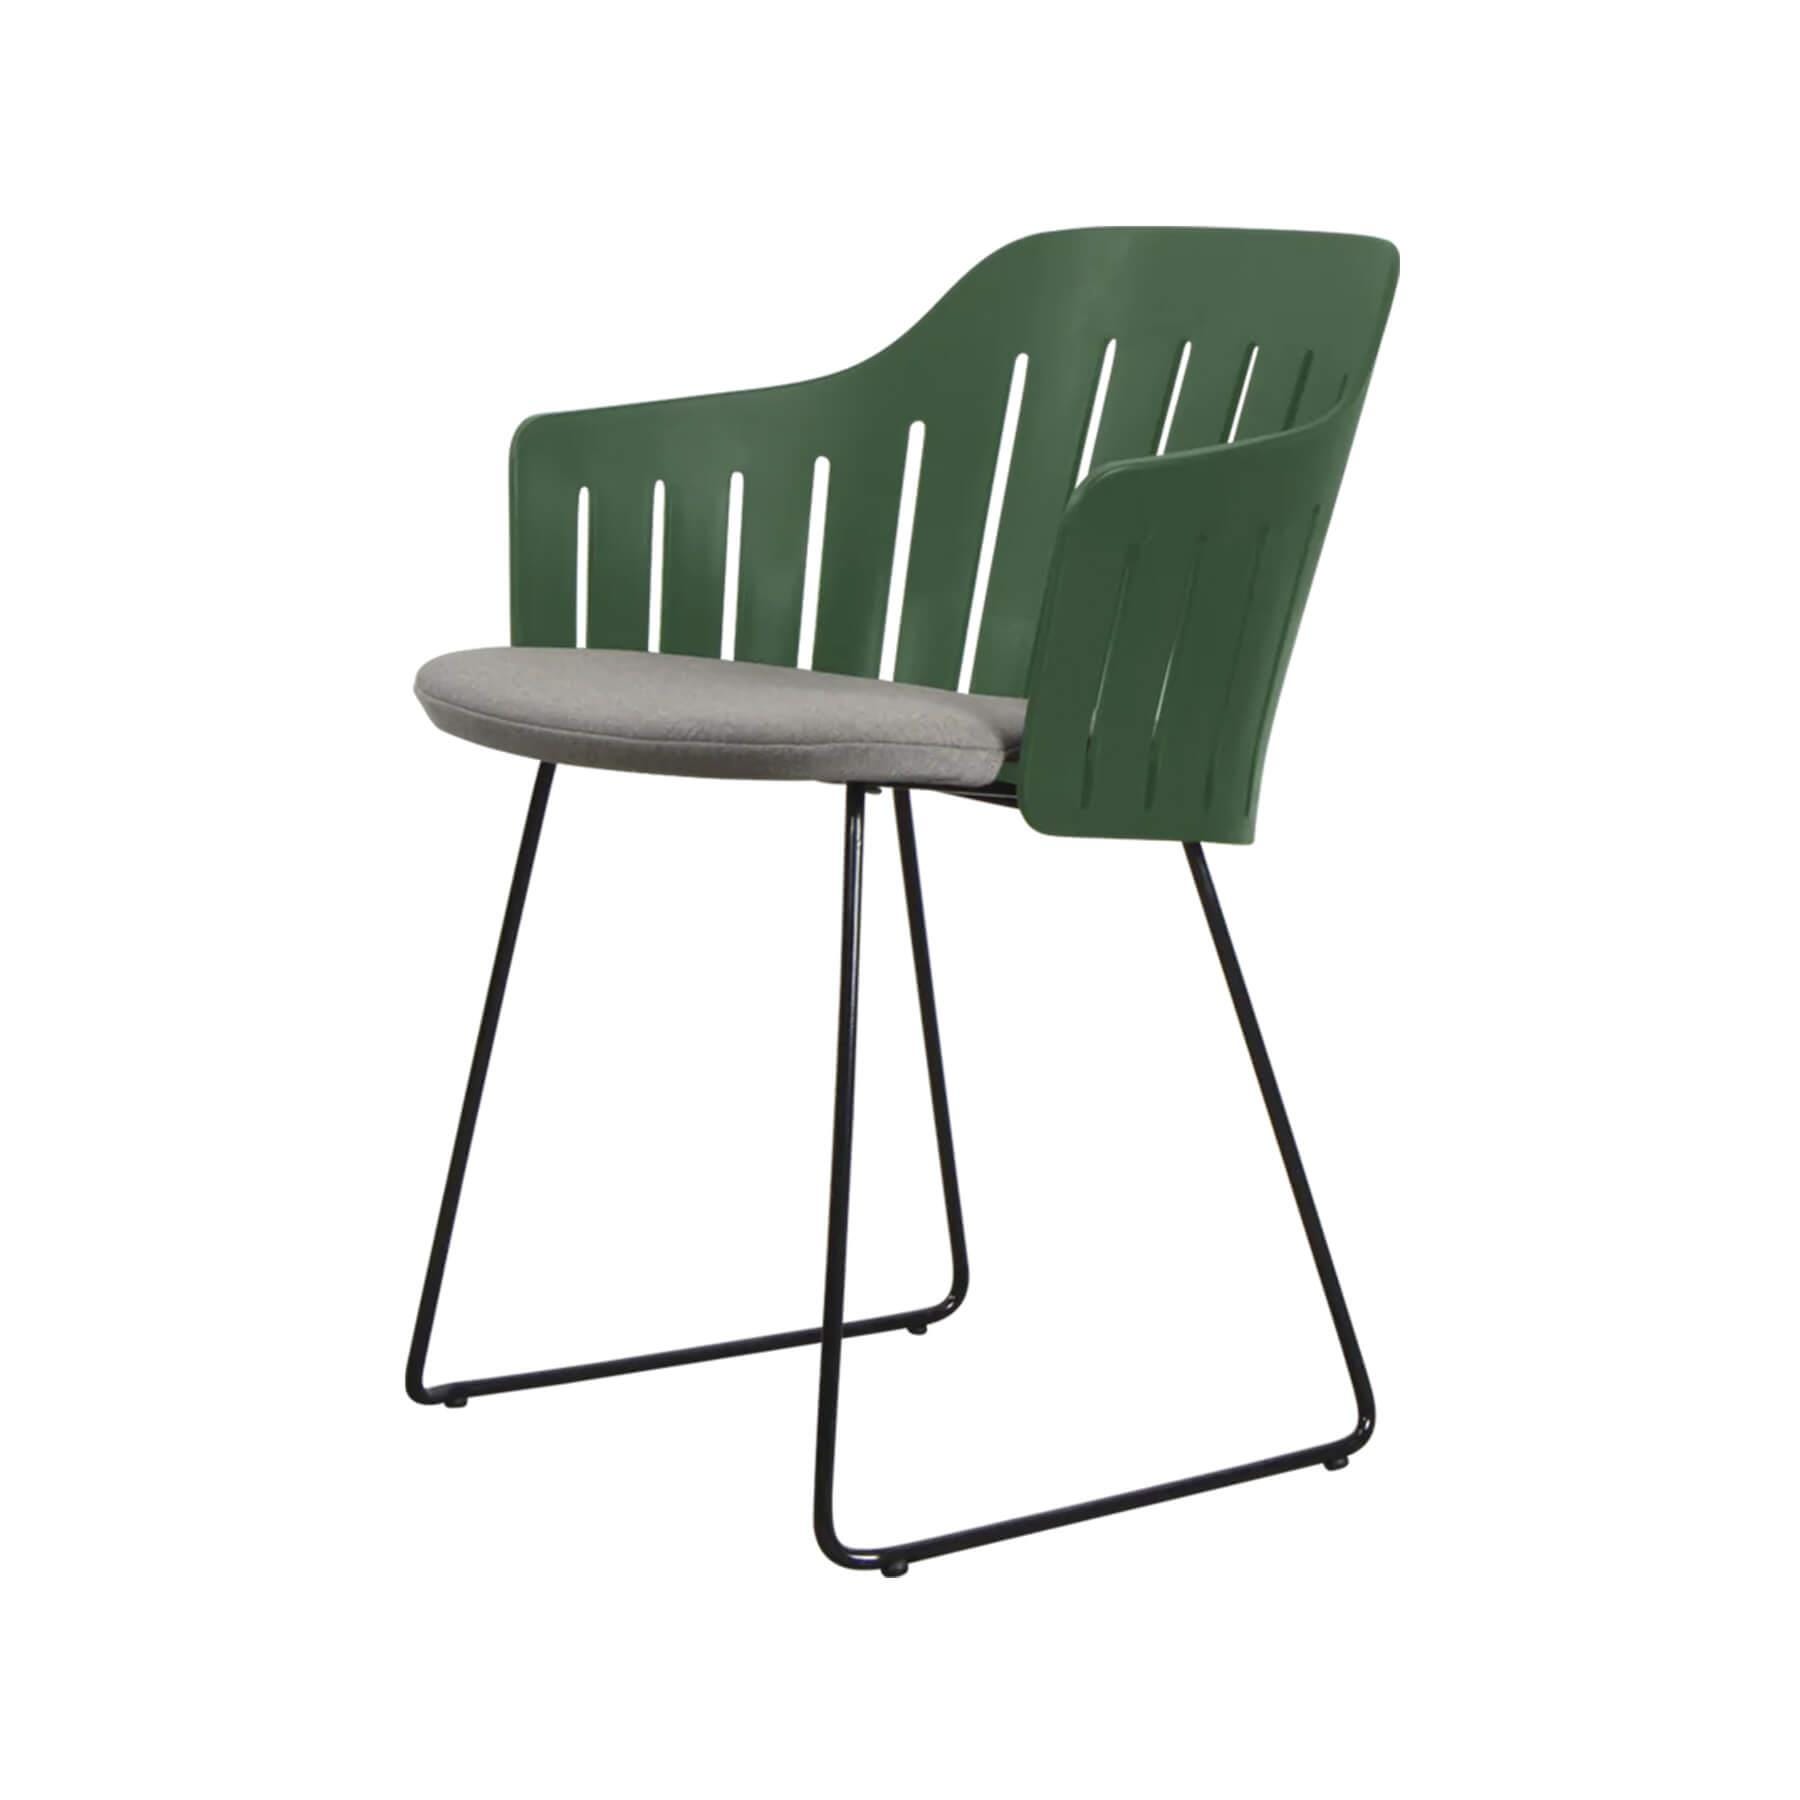 Caneline Choice Outdoor Chair With Steel Sled Legs Dark Green Seat Natte Taupe Cushion